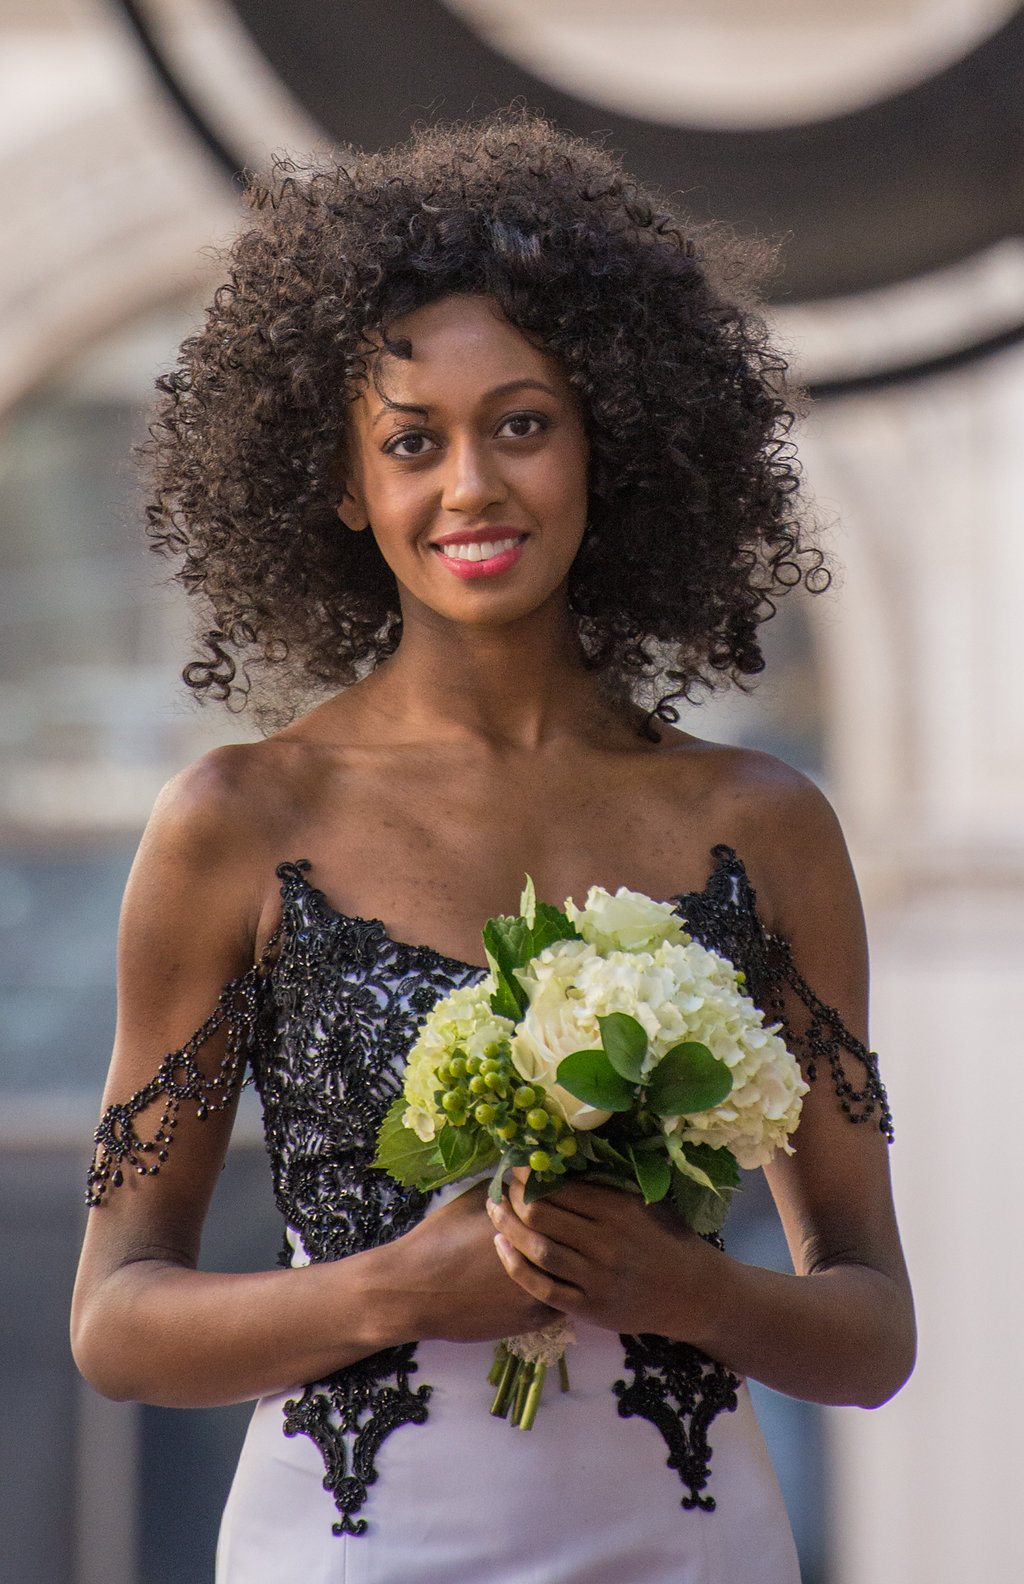 a woman in a white wedding gown with lacy beaded black overlay smiles at the camera while holding a bouquet